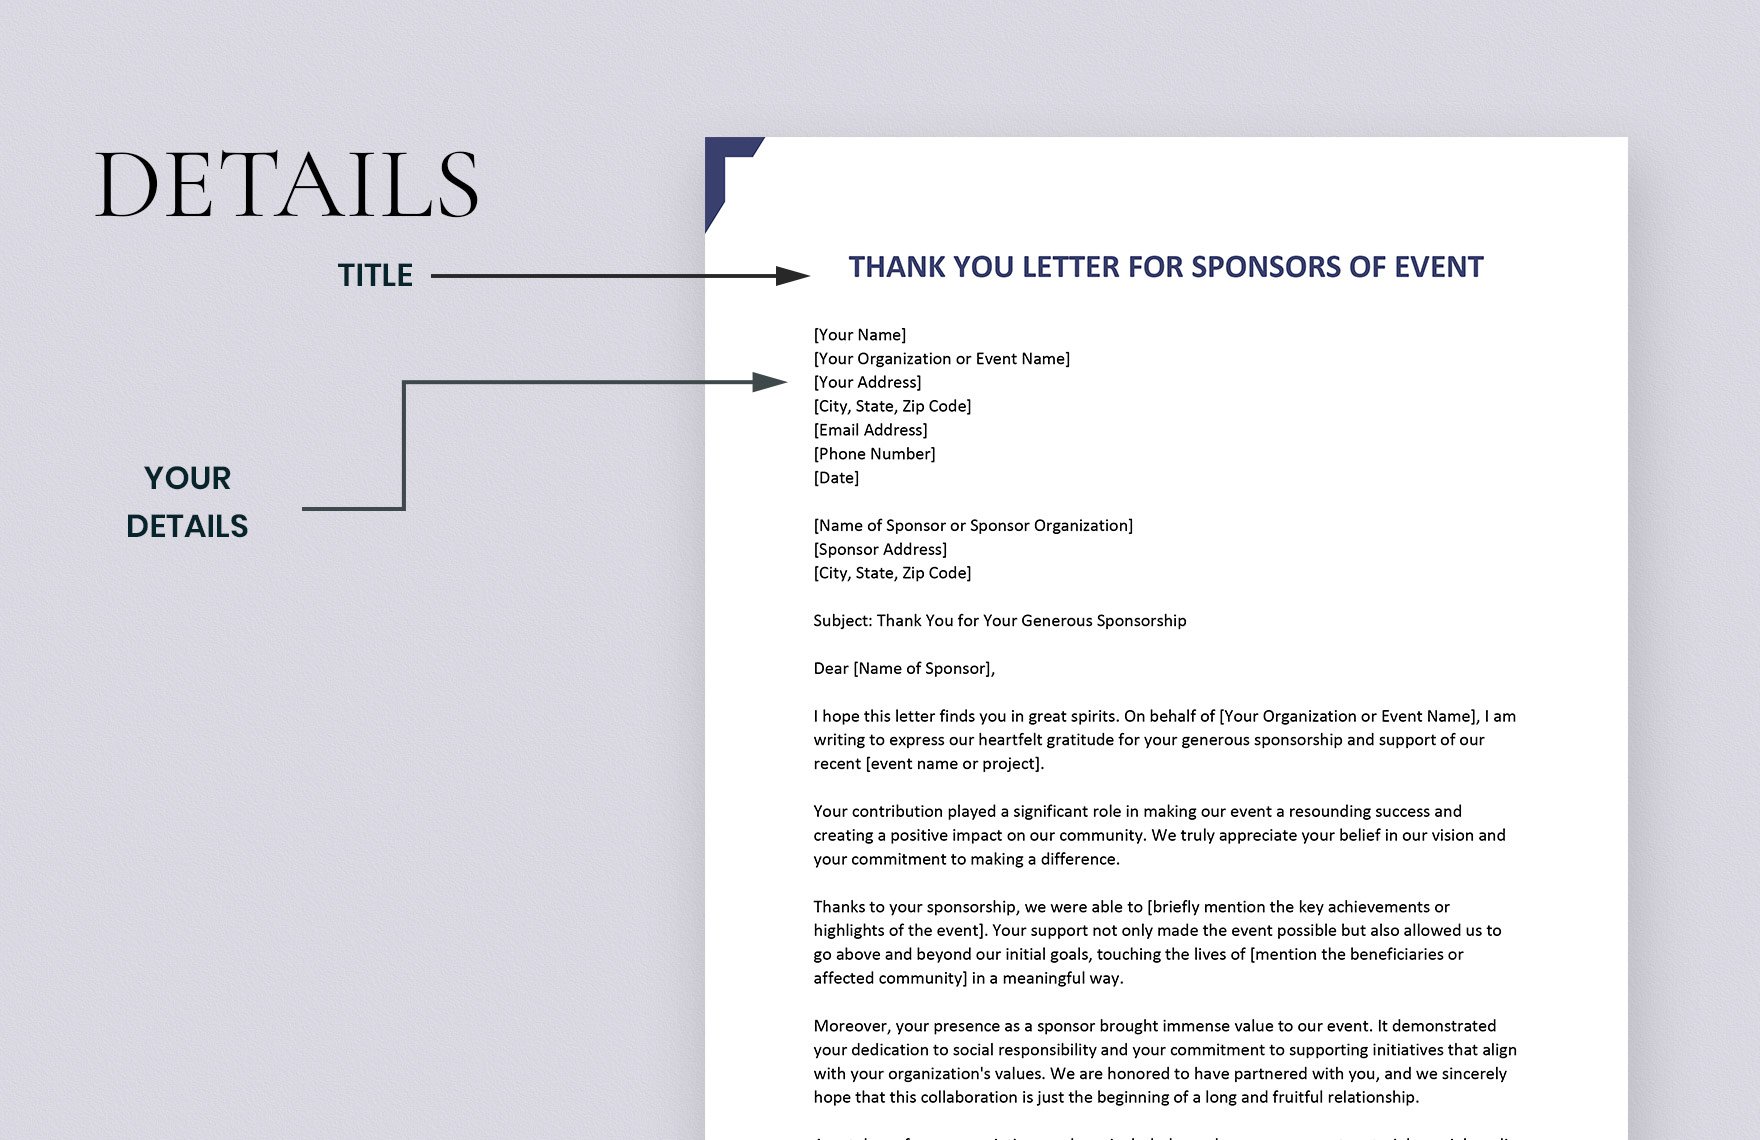 Thank You Letter for Sponsors of Event